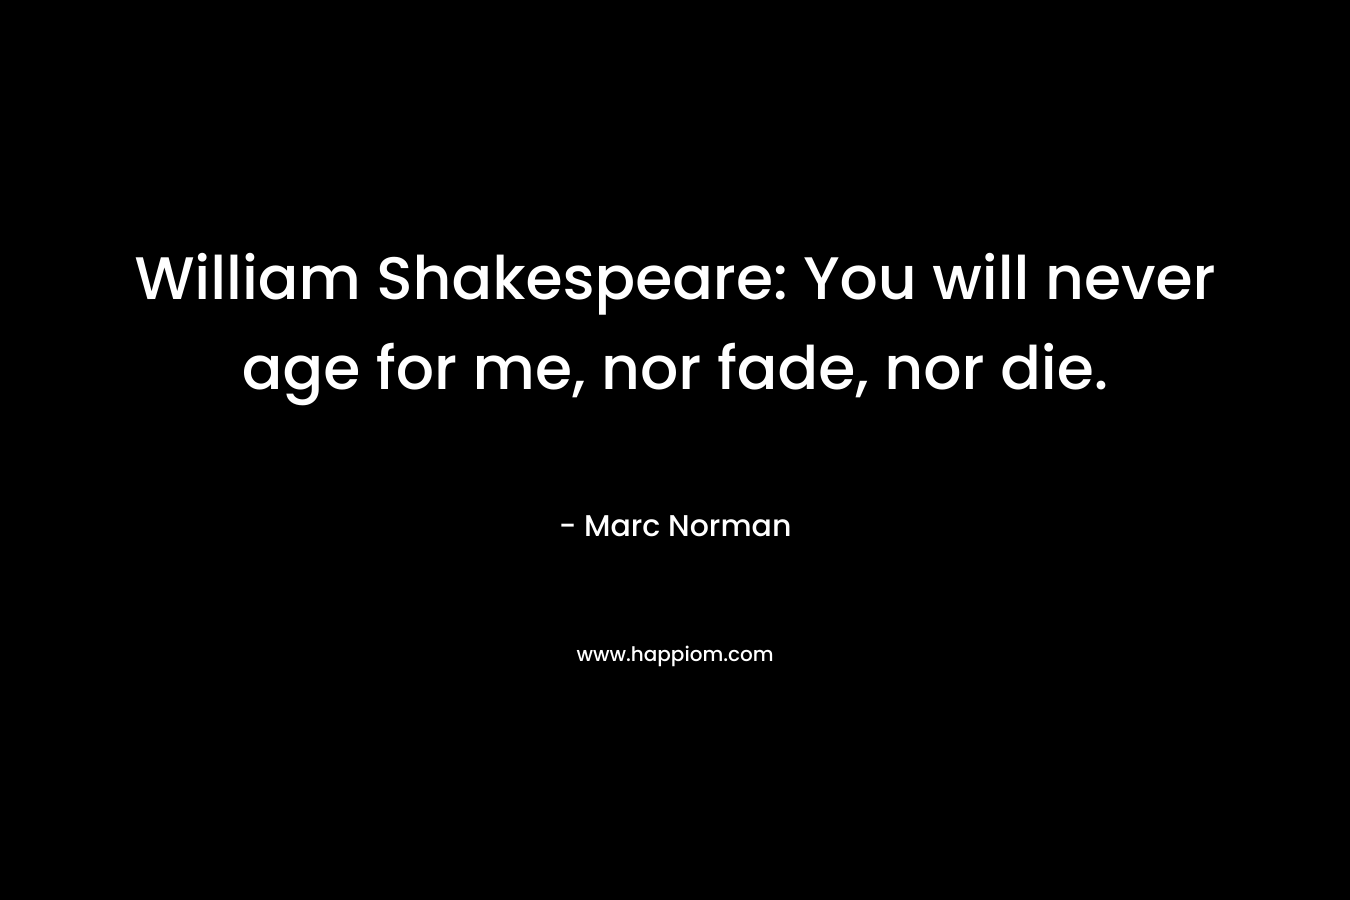 William Shakespeare: You will never age for me, nor fade, nor die.